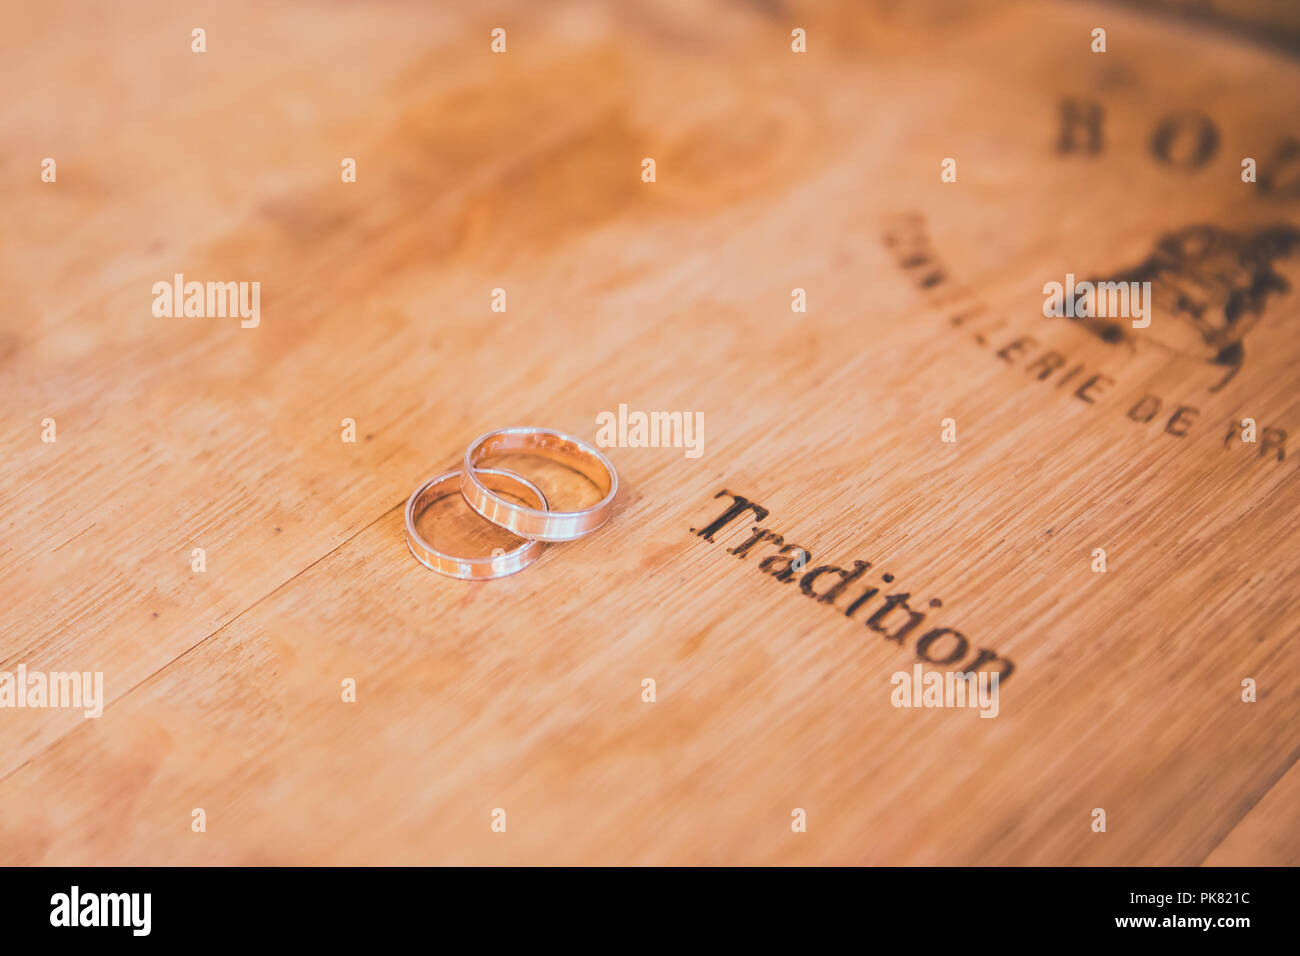 Wedding Rings and Tradition Engraved on Wooden Wine Barrel Stock Photo